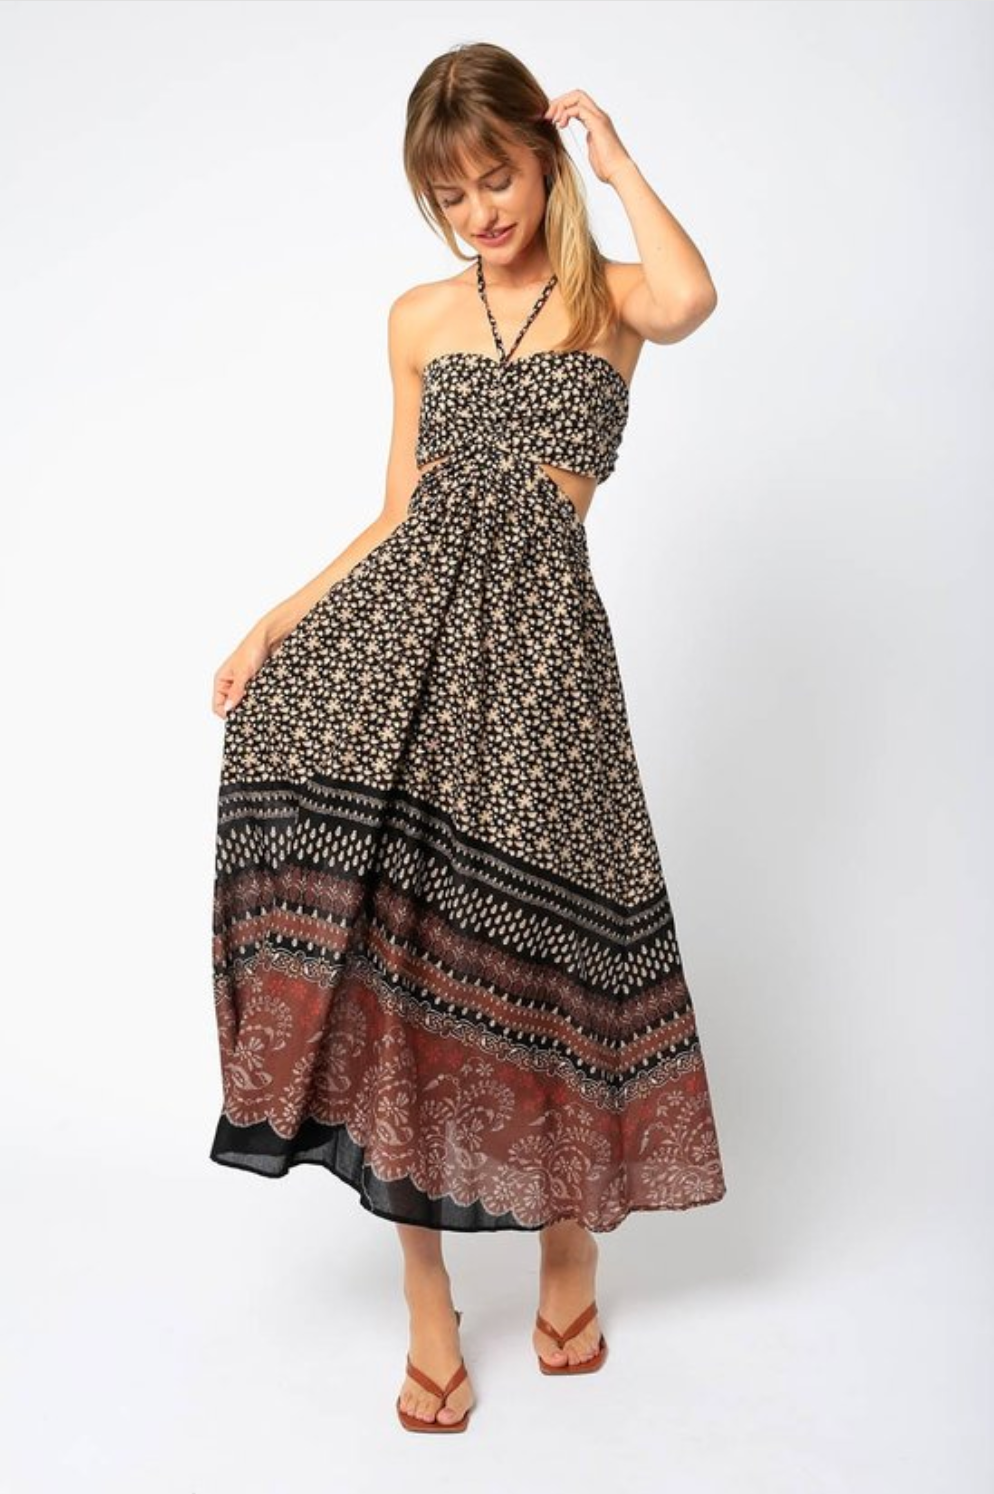 Woman is wearing Olivaceous Halter Maxi Dress.  The Maxi dress features cutouts and open back. The dress is black color with various prints in beige and red colors. (7706621706448)